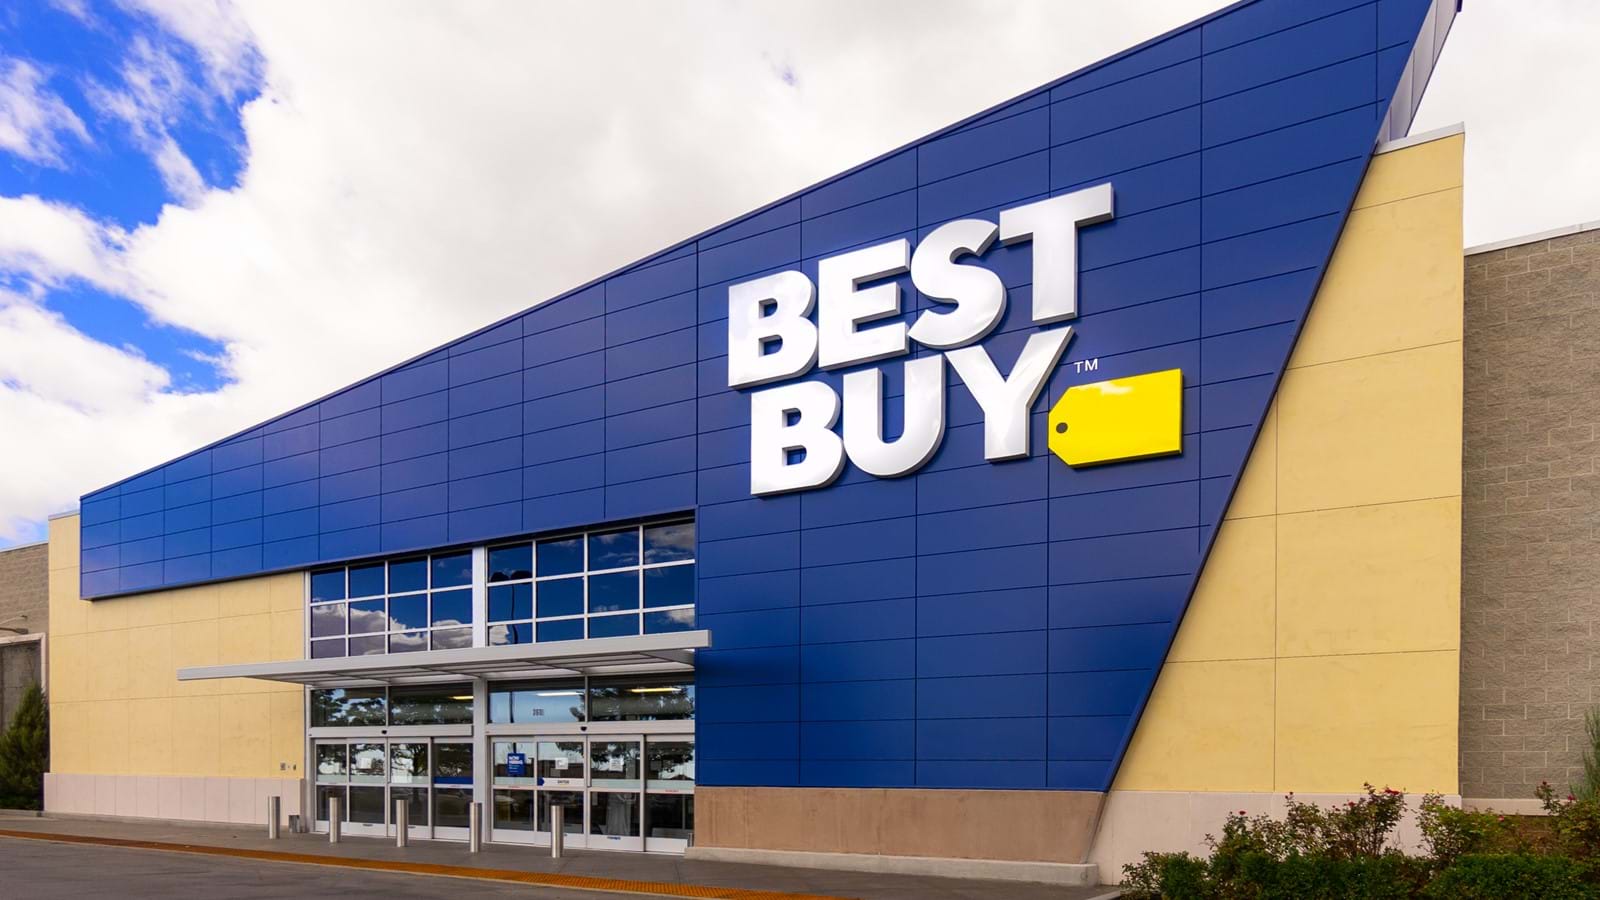 Best Buy Canada, large electronics retail store